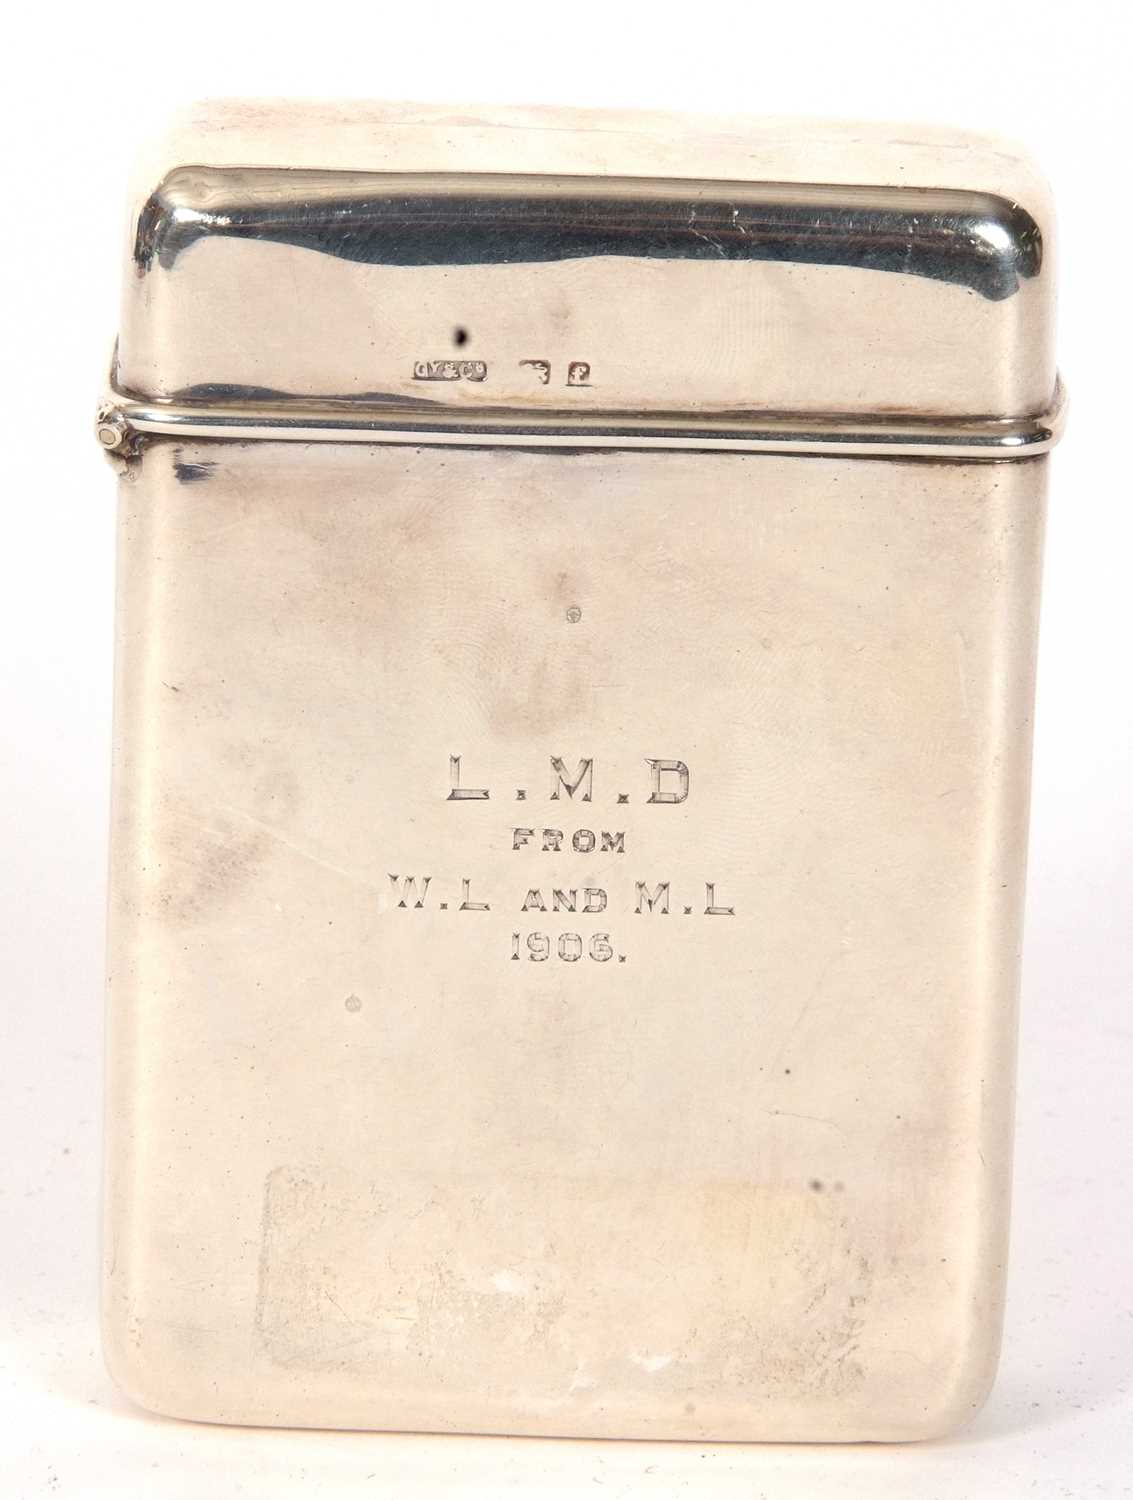 An Edwardian silver cigar case of plain polished rectangular form, hinged lid with personalised